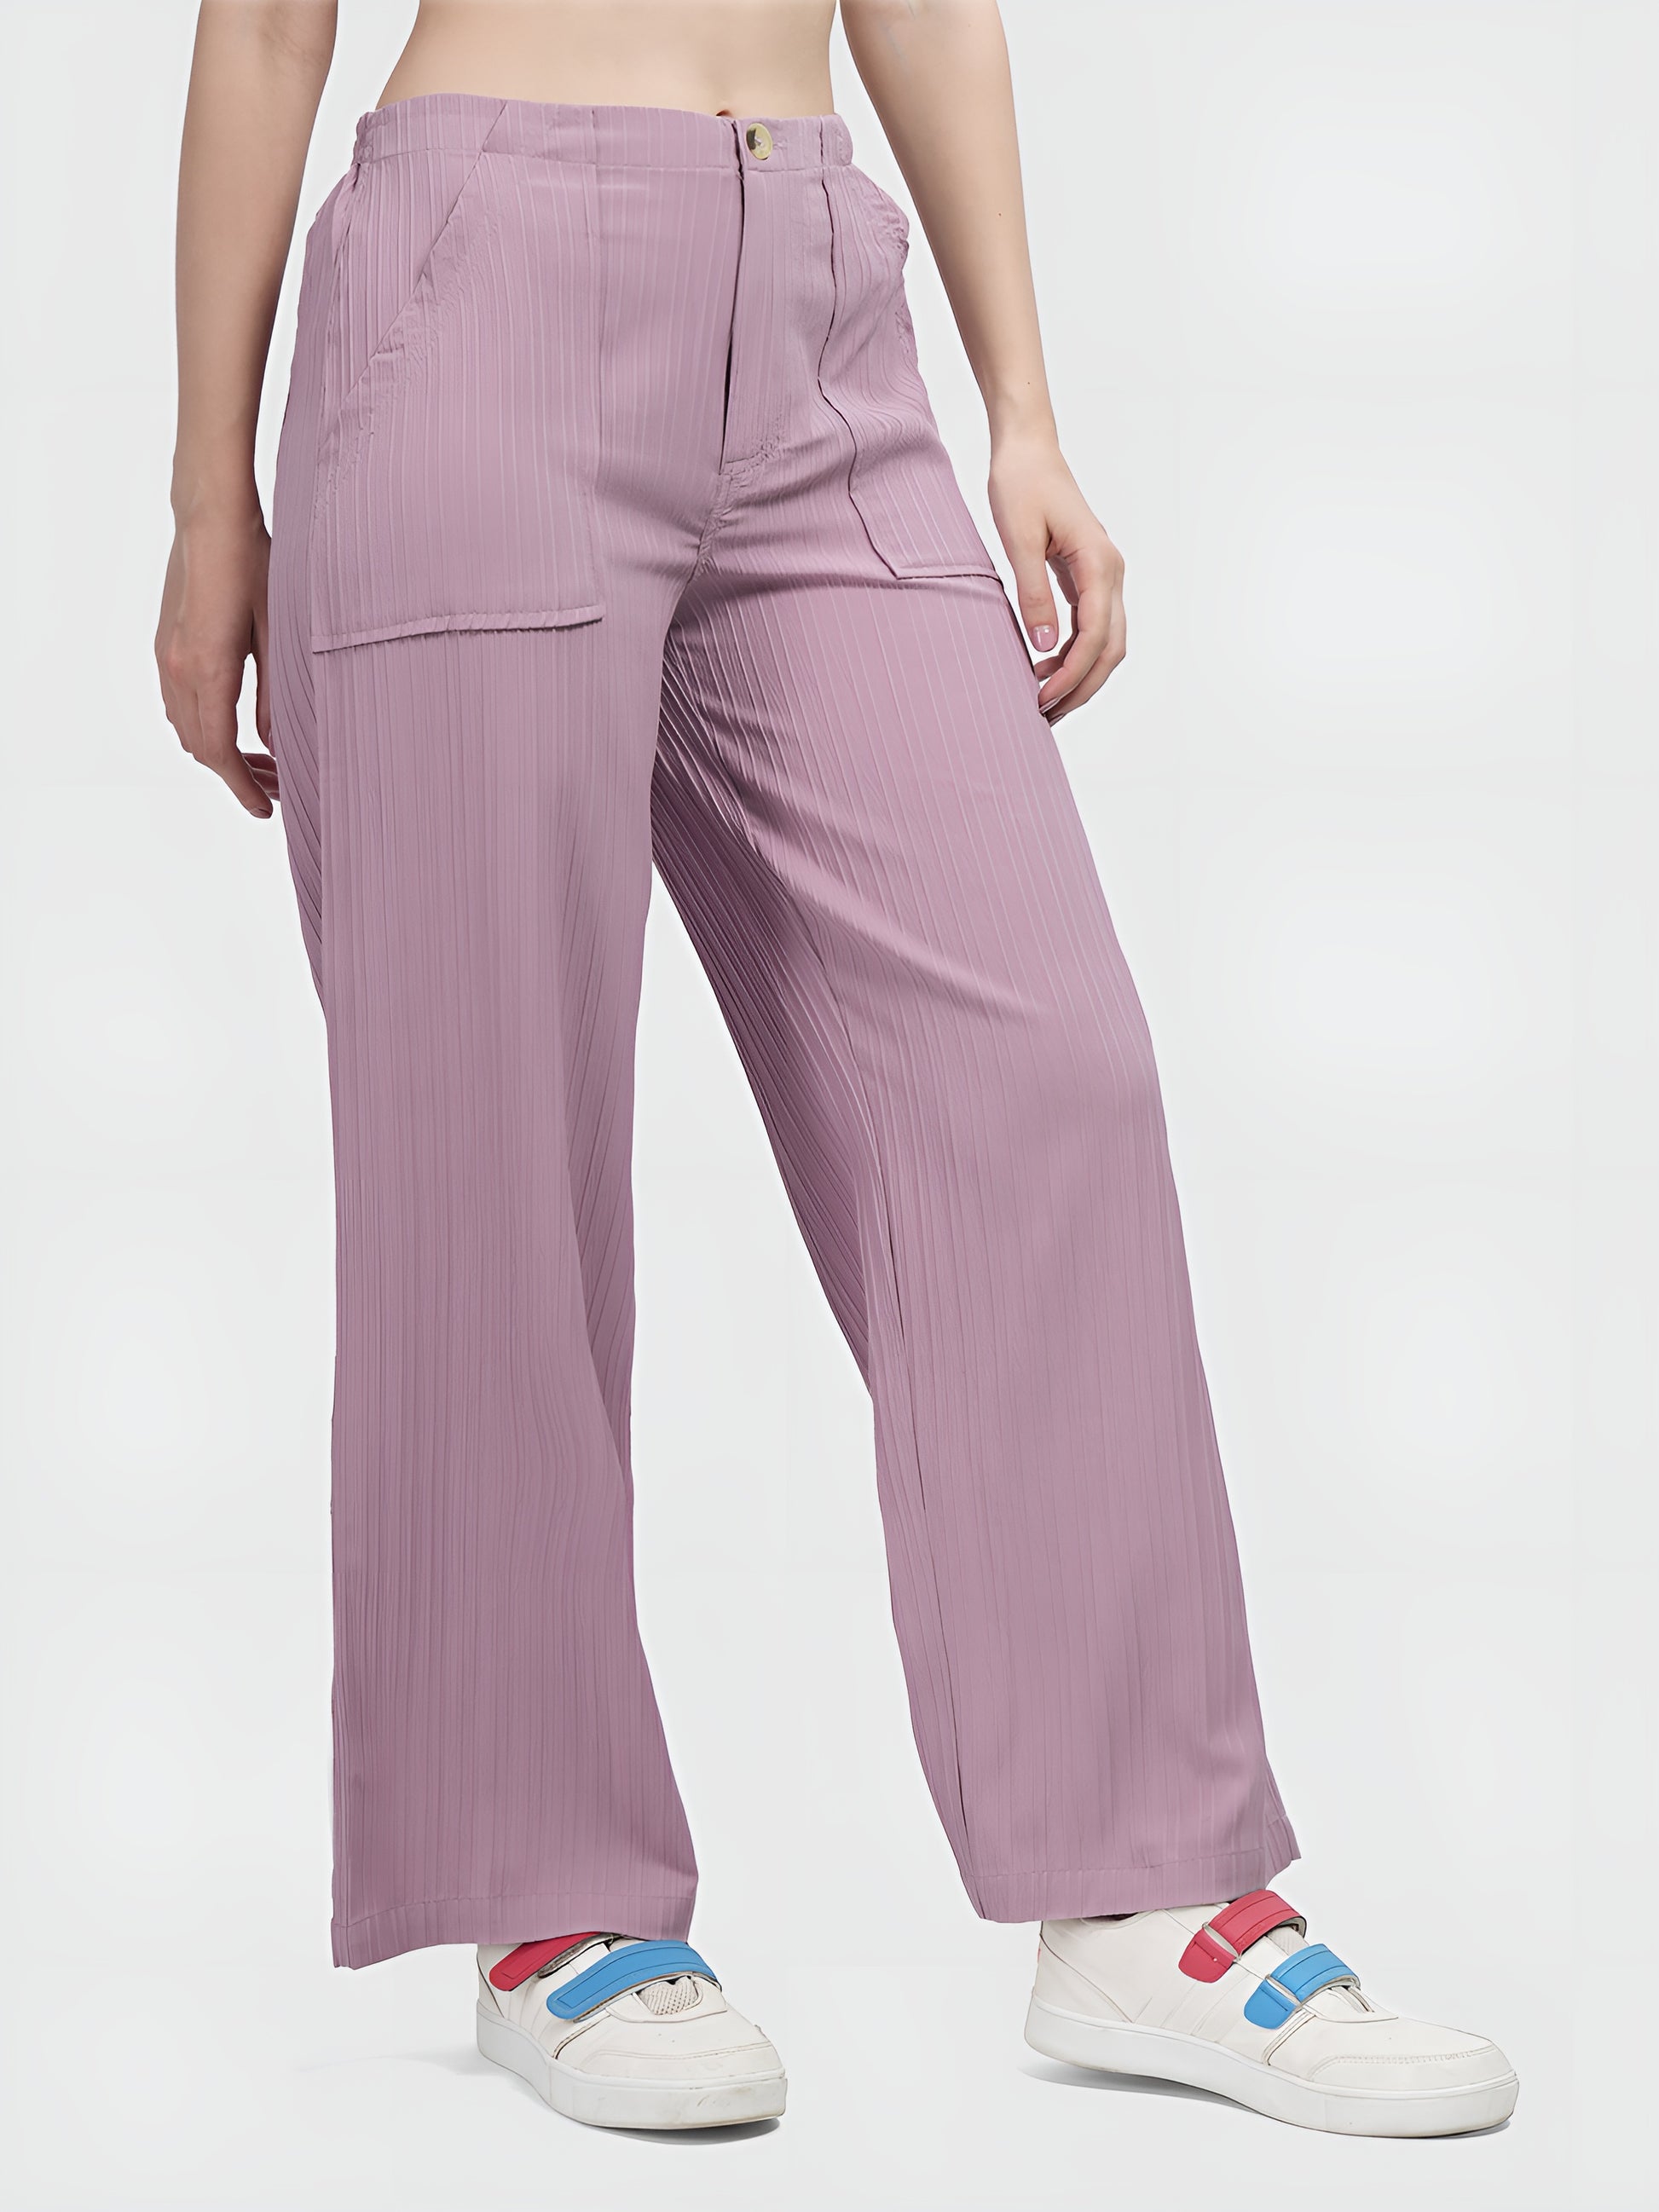 Lilac  Colour | Women Formal Trousers Regular Fit Being Flawless